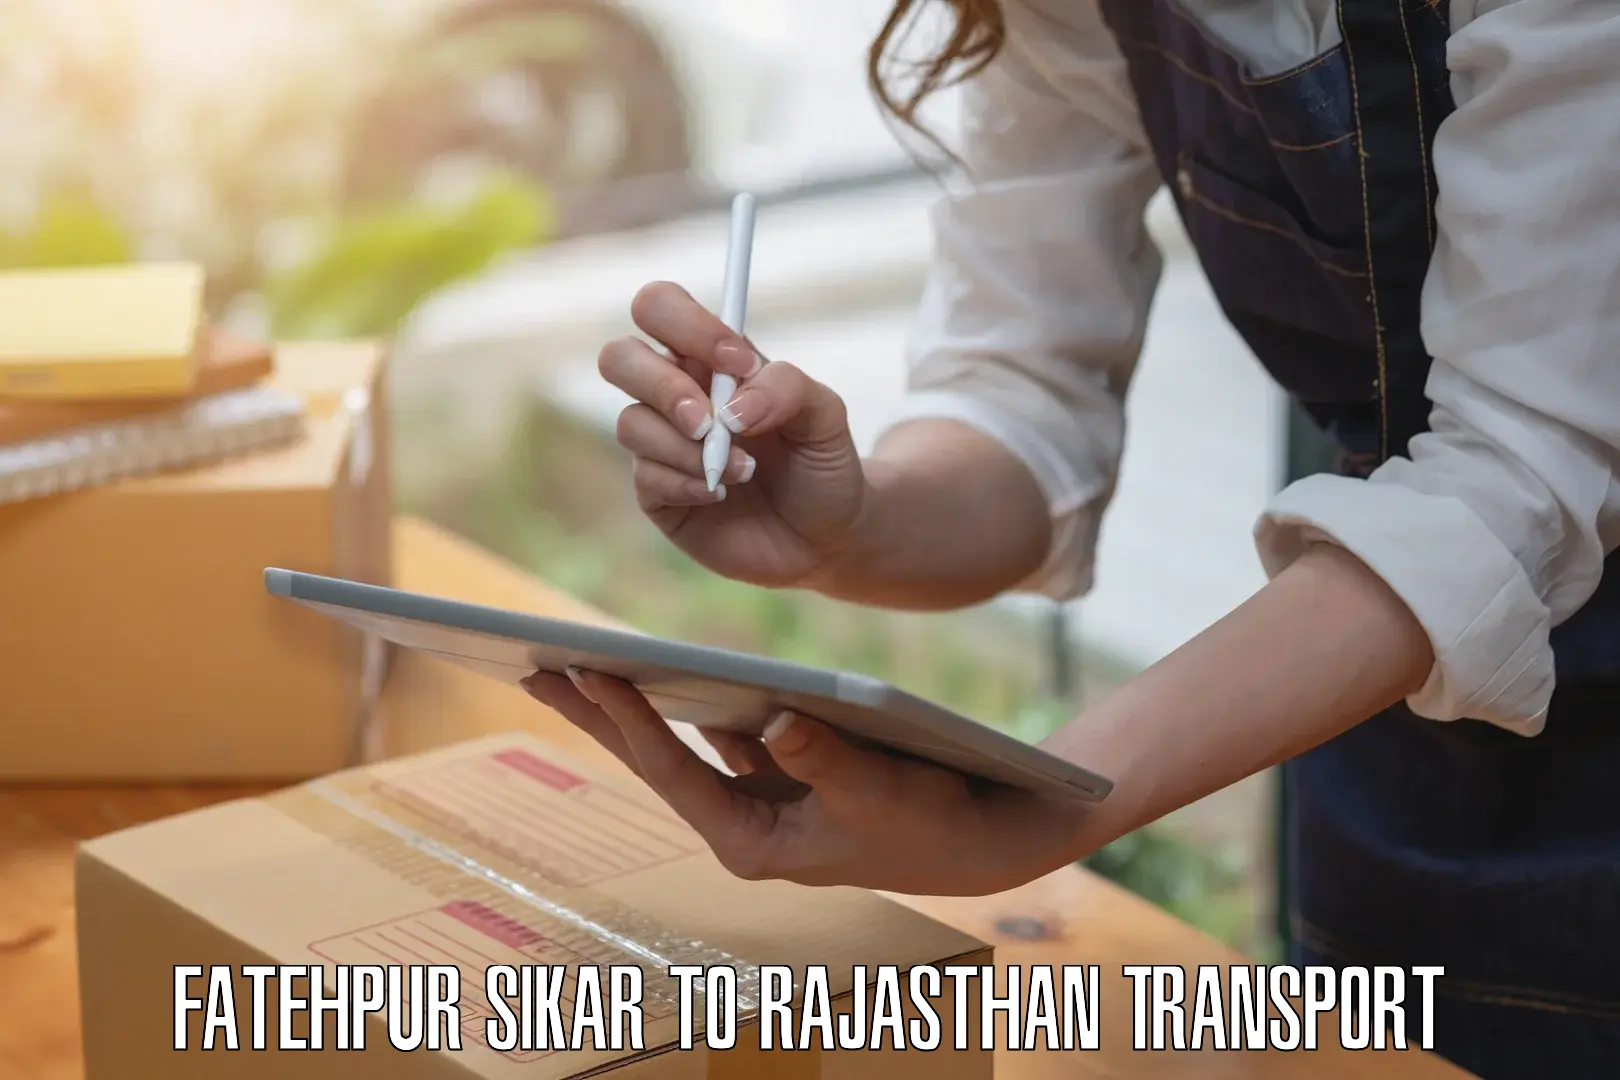 Container transport service Fatehpur Sikar to Bhopalgarh